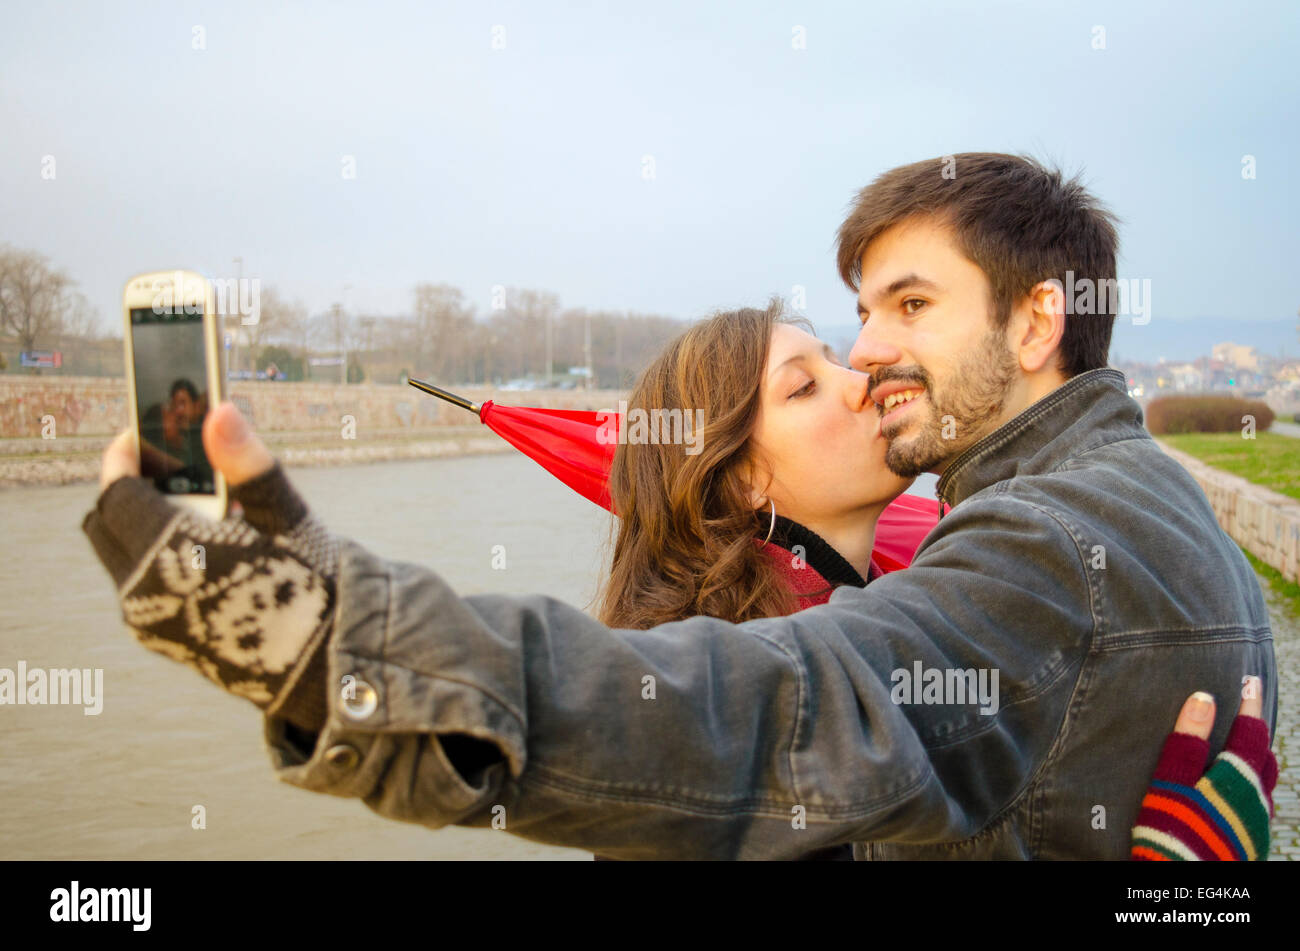 Boy and girl taking a selfie on a rainy day outdoors Stock Photo